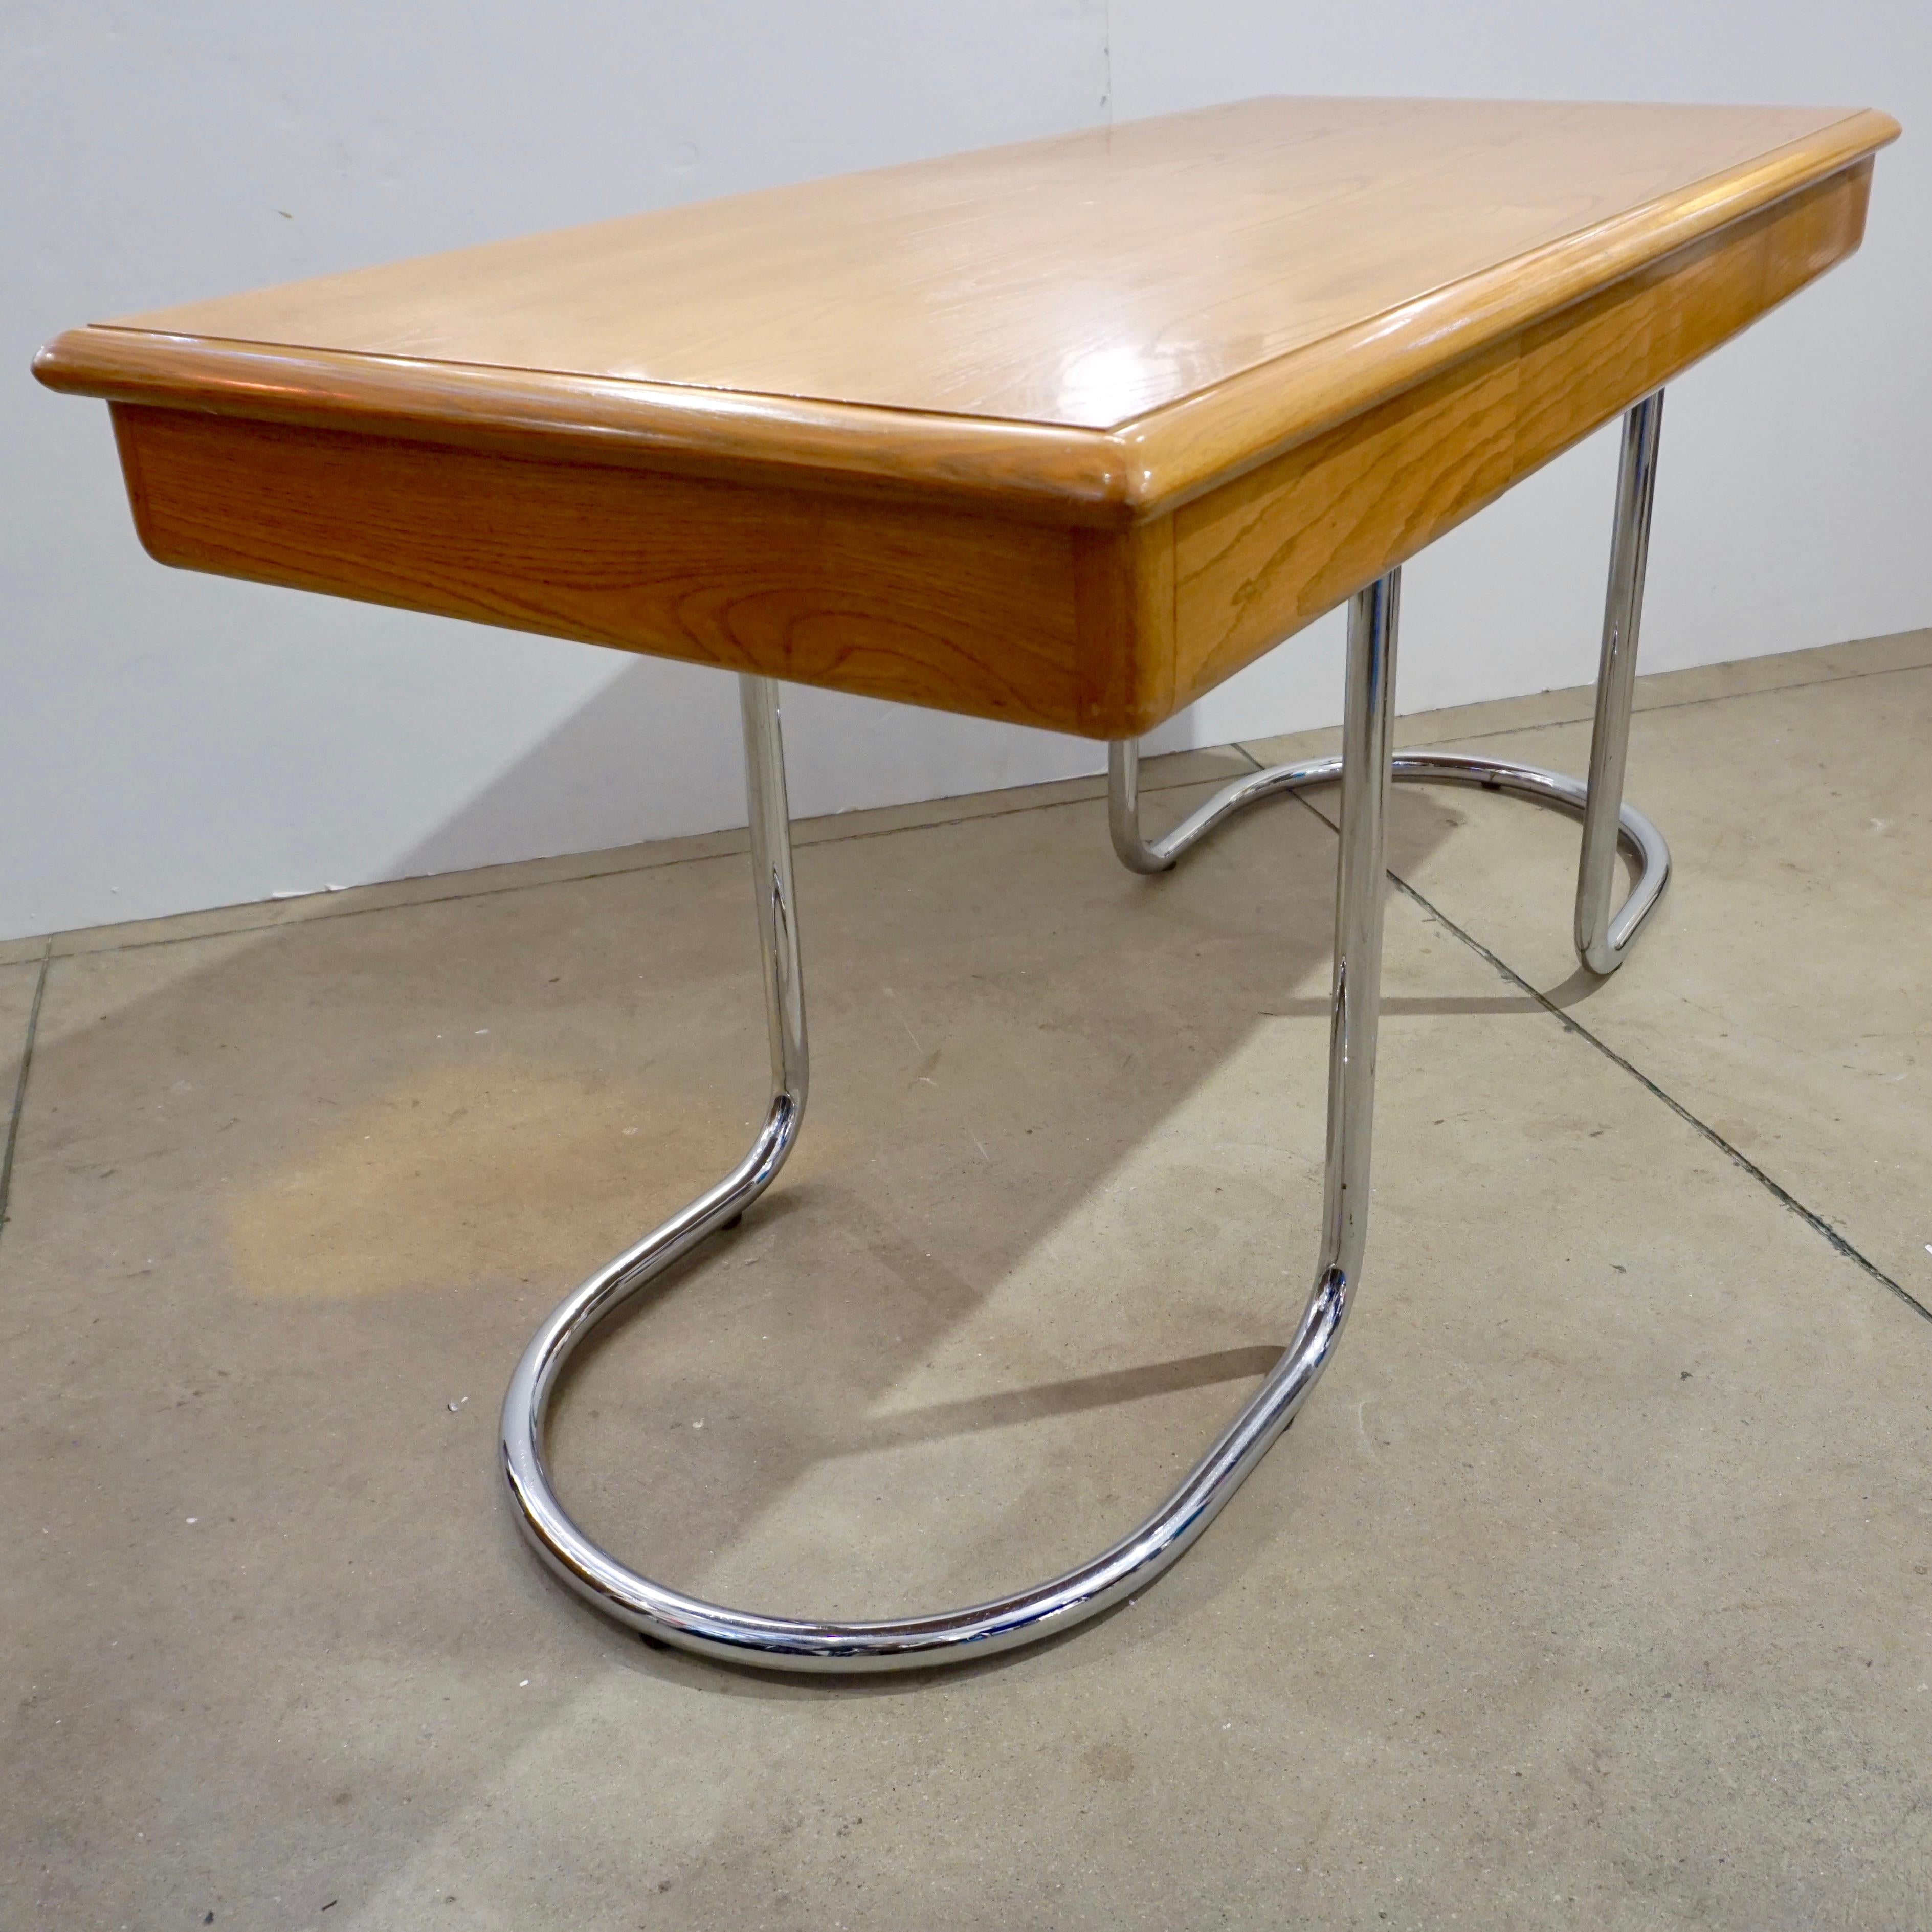 1970s Italian Vintage Curved Nickel Legs 3-Drawer Ash Tree Center Desk/Console For Sale 3